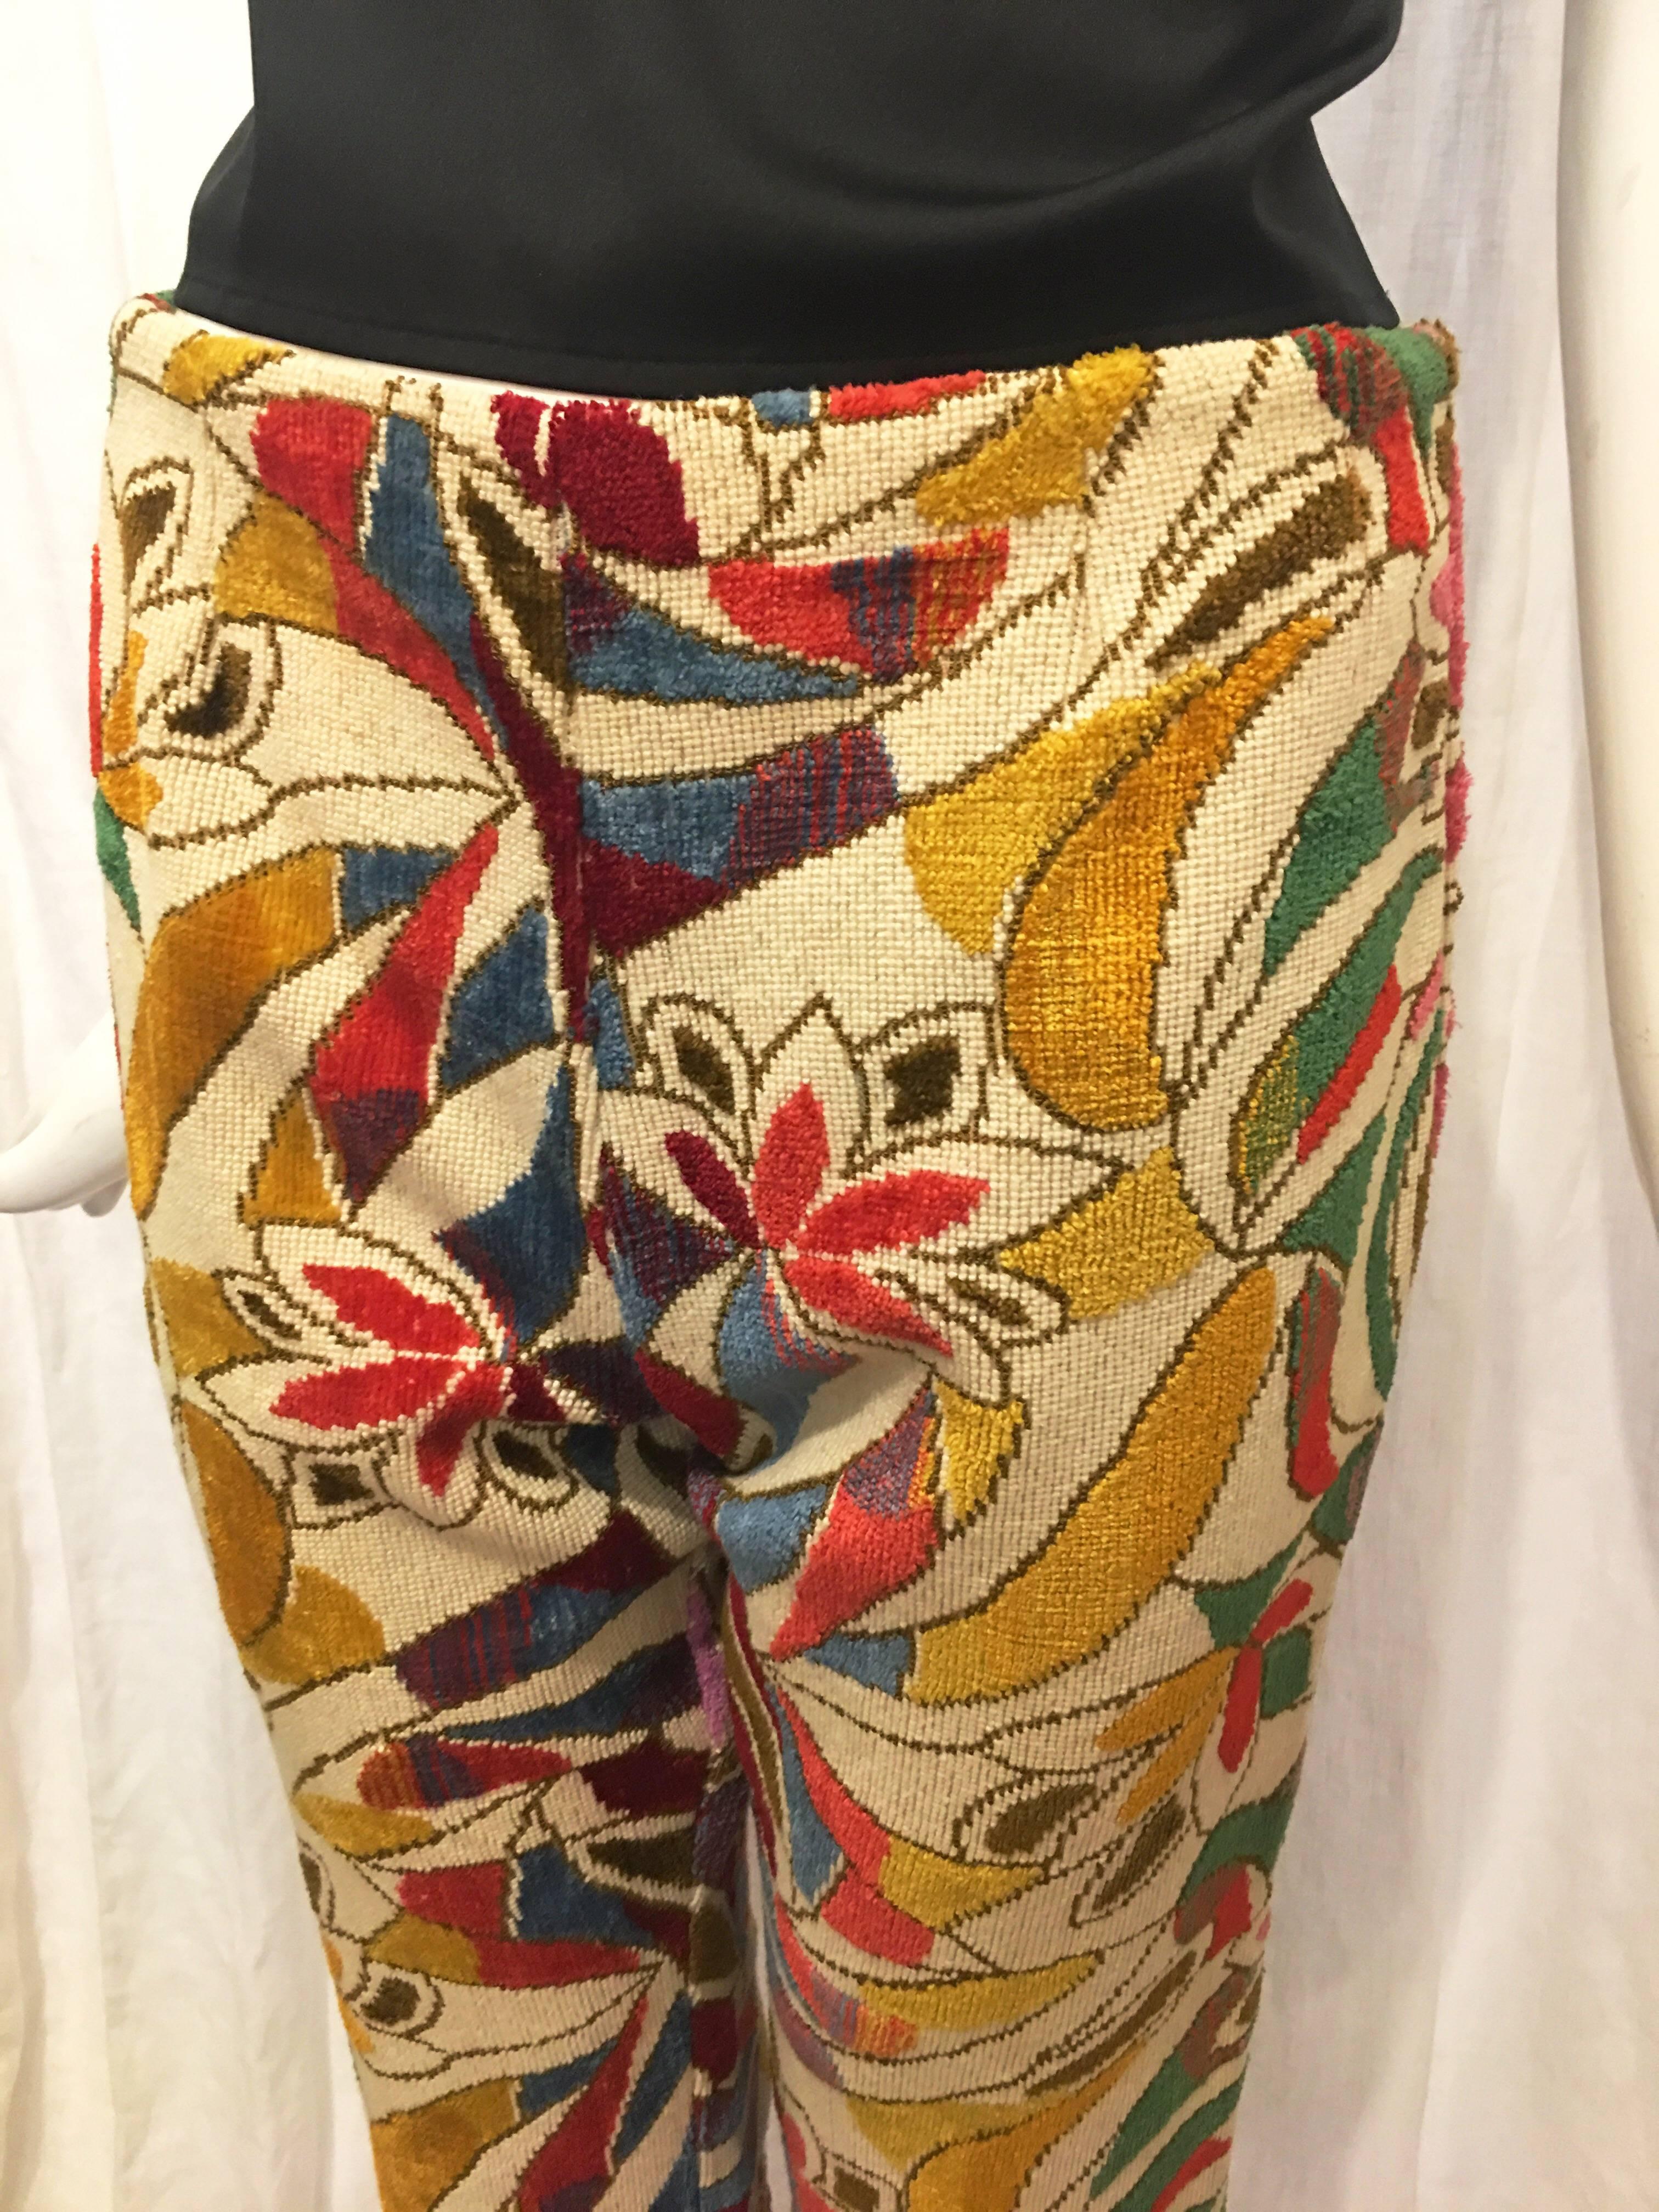 White pants with all over multicolored floral print. Zip up the back with hook and eye closure. Flared at bottom. Slight rip at seam-please note photos. No tags, most likely handmade. Sit on the hips. A bold pair of pants for those who aren’t afraid